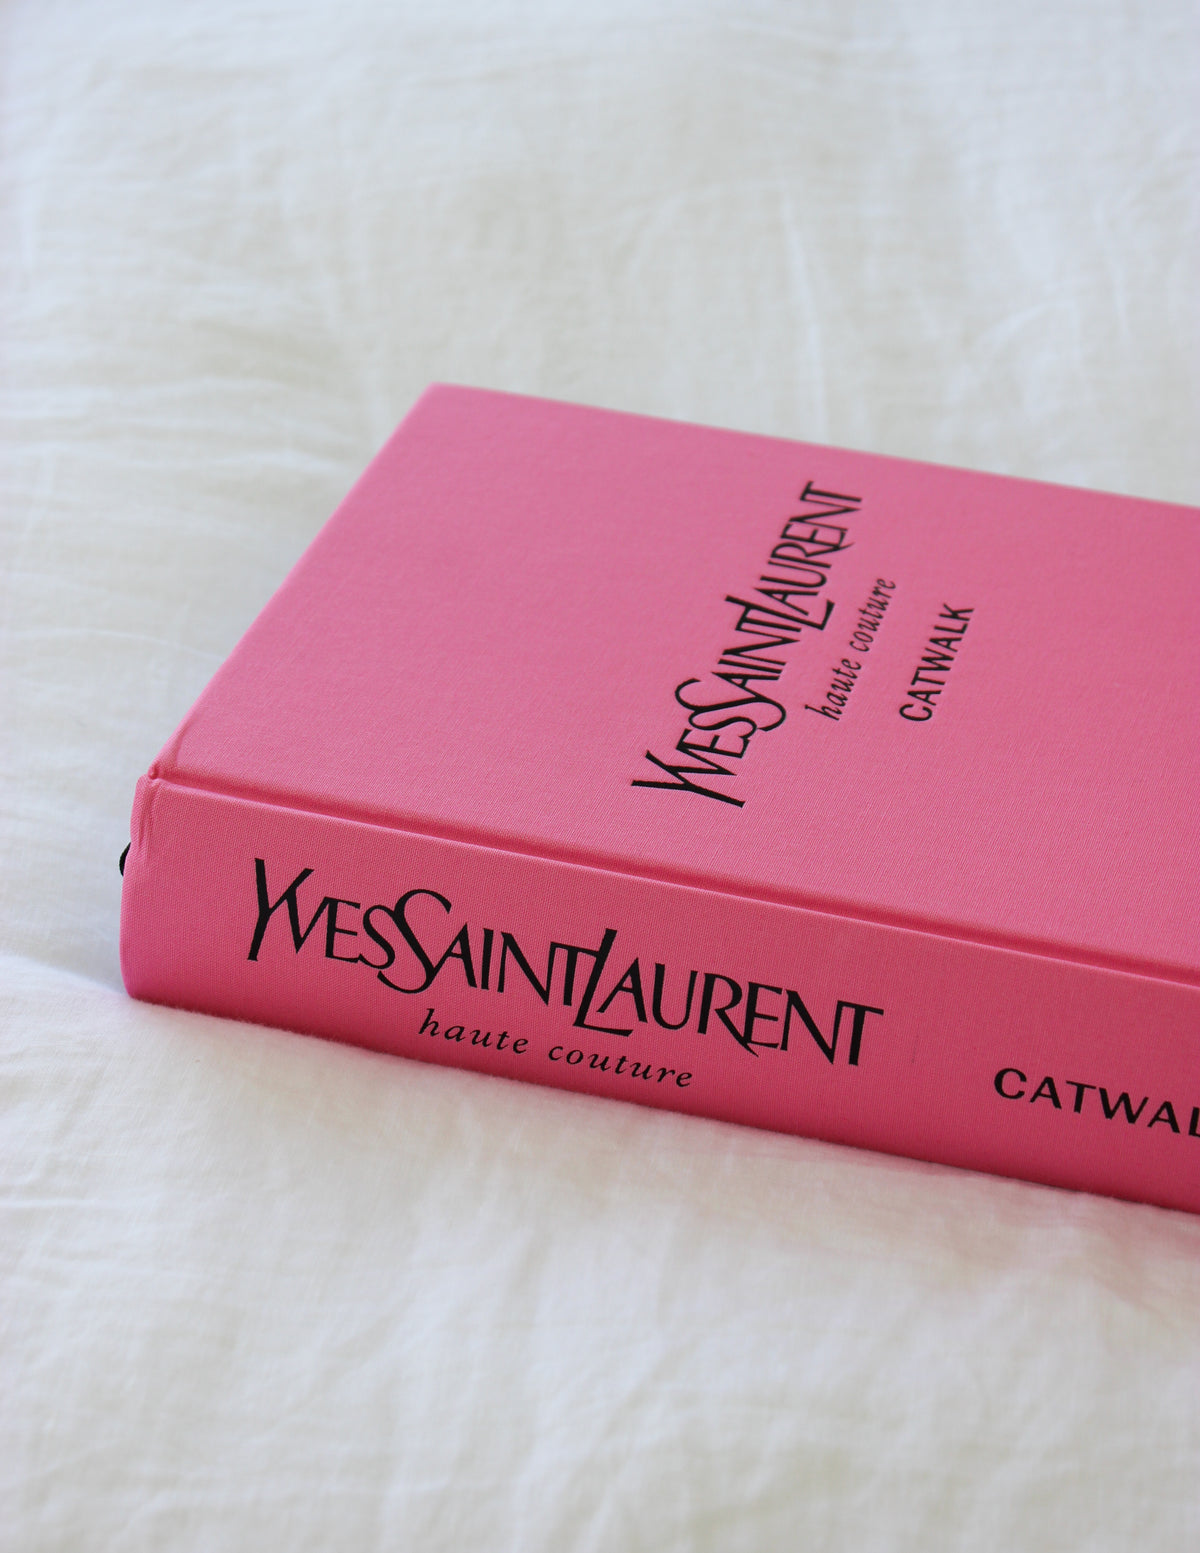 Yves Saint Laurent Catwalk: The Complete Haute Couture - Hardcover